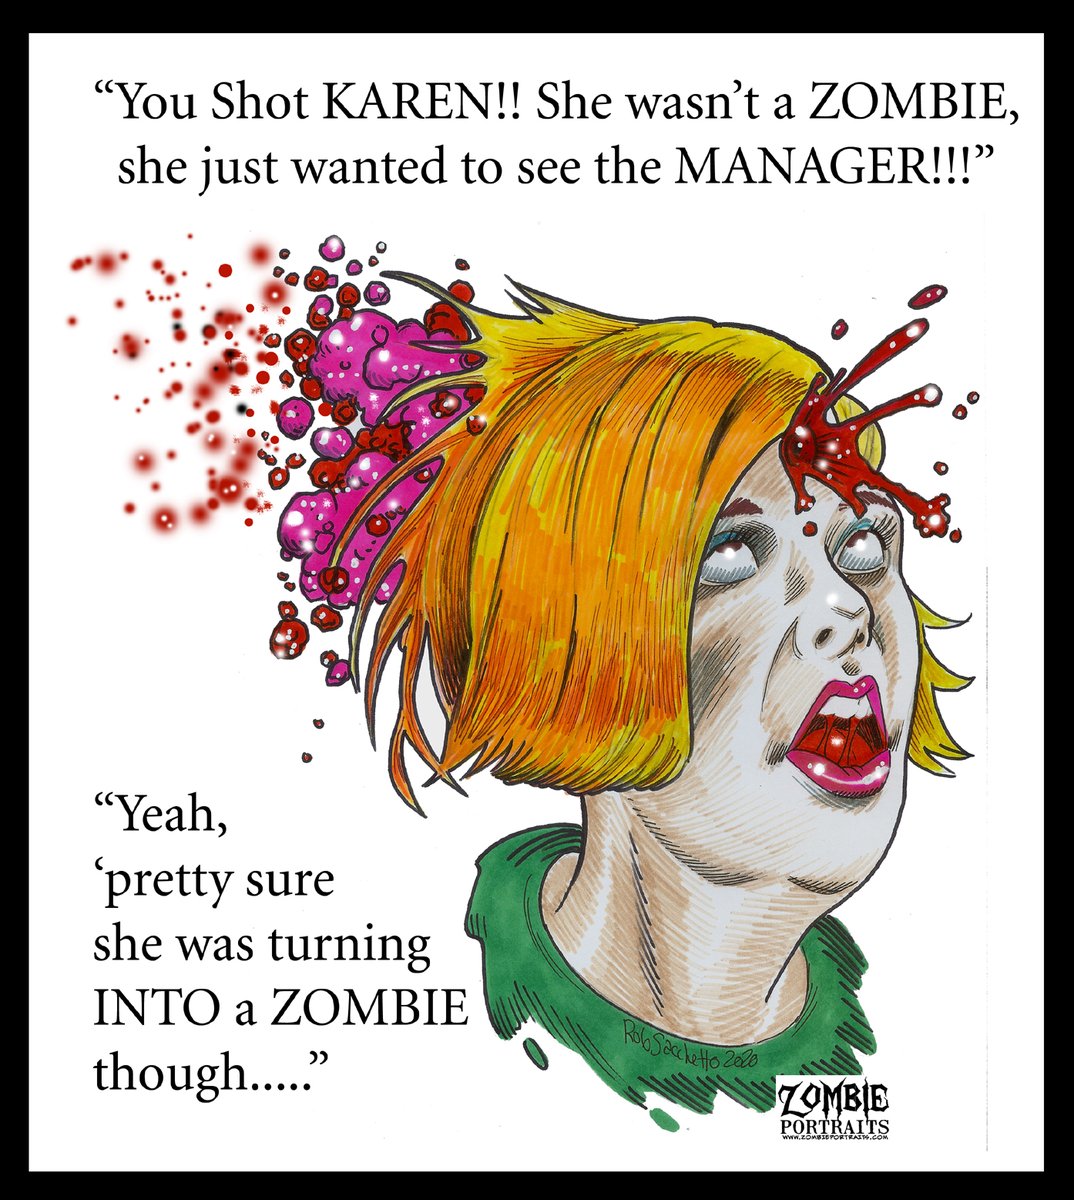 Today I give 'Zombie' Karen her comeuppance in the latest Zombie Art post on Zombie Daily! #karen #karenmeme #karenmemesarehilarious #zombiekaren #karenkilled #zombieart #zombieportraits #robsacchettoart #sacchettozombieart #zombie #zombies